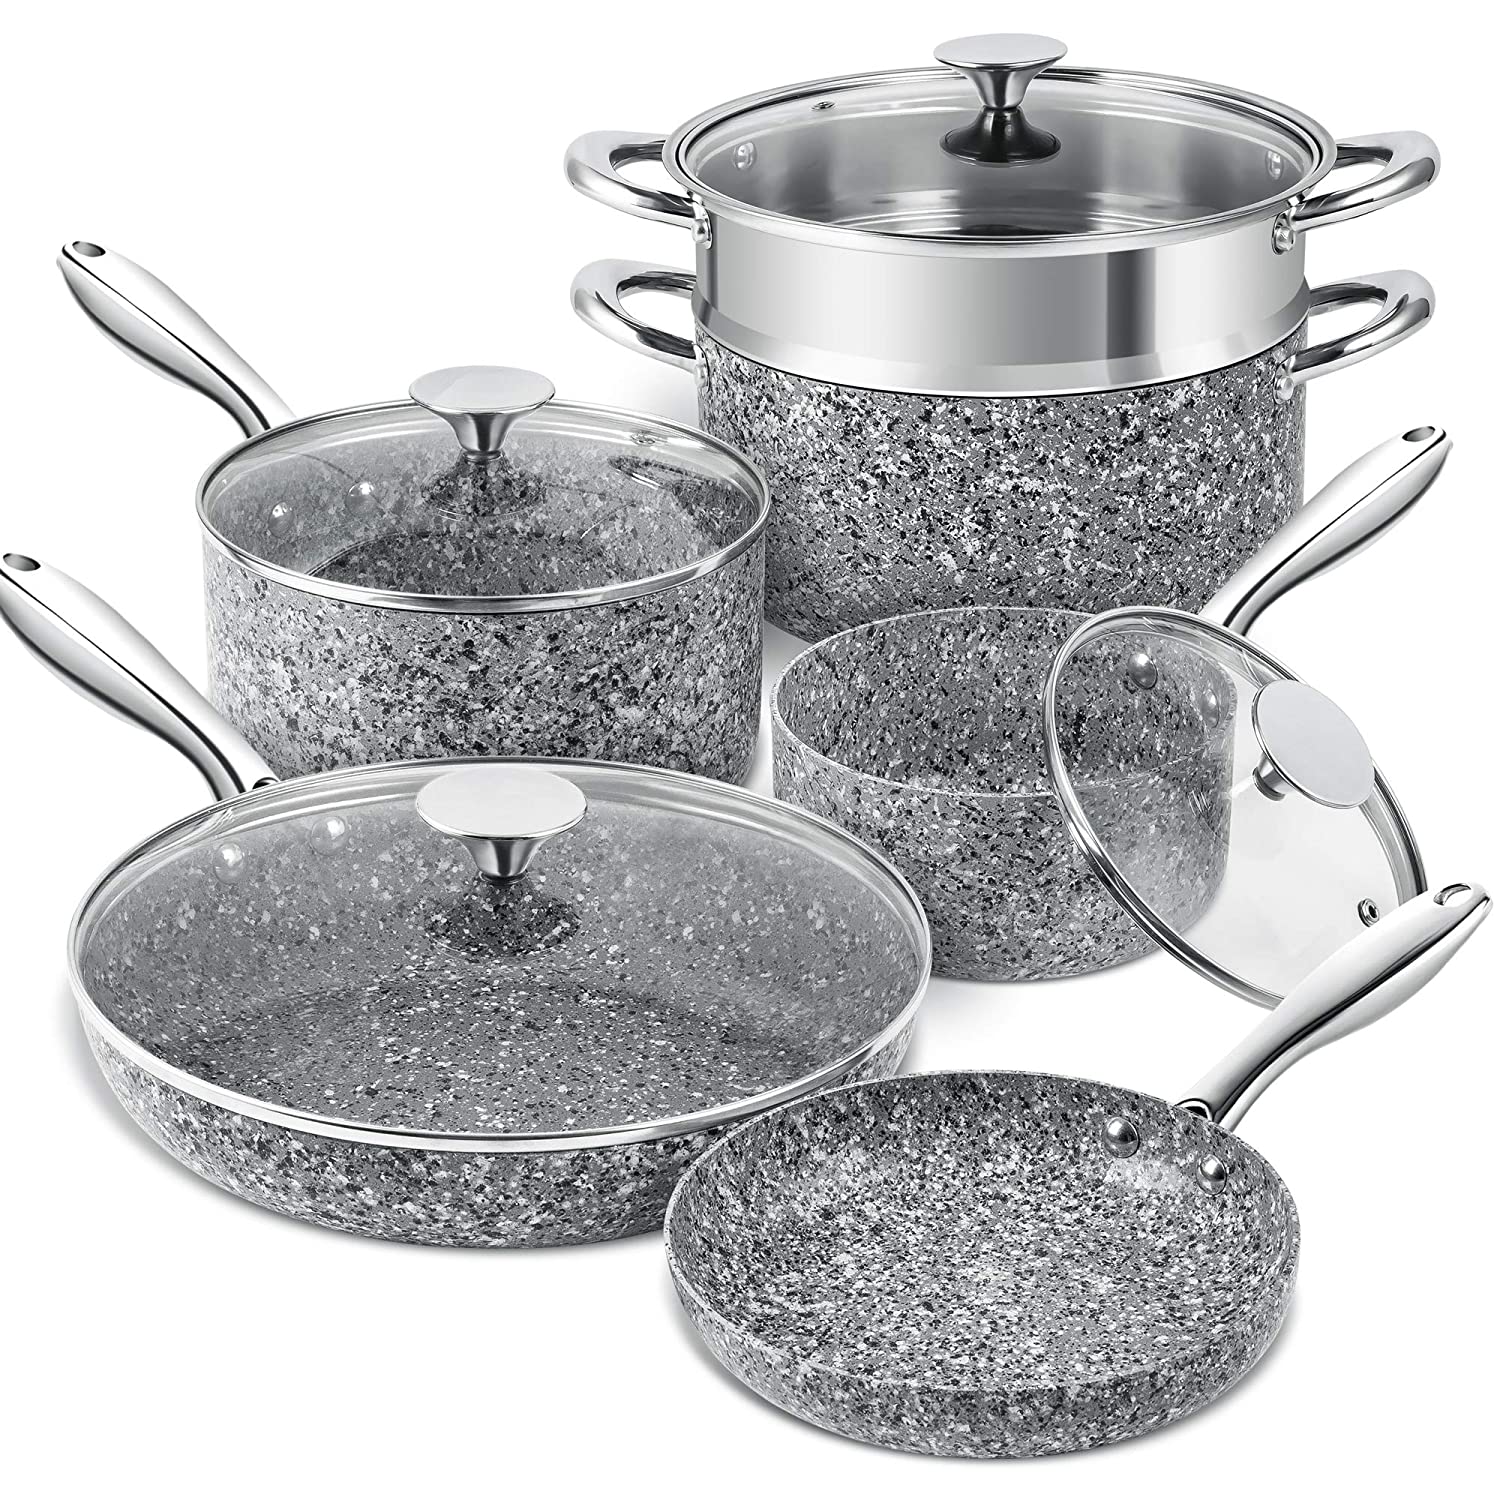 Michelangelo 3 Quart Saucepan with Lid, Ultra Nonstick Coppper Sauce Pan with Lid, Small Pot with Lid, Ceramic Nonstick